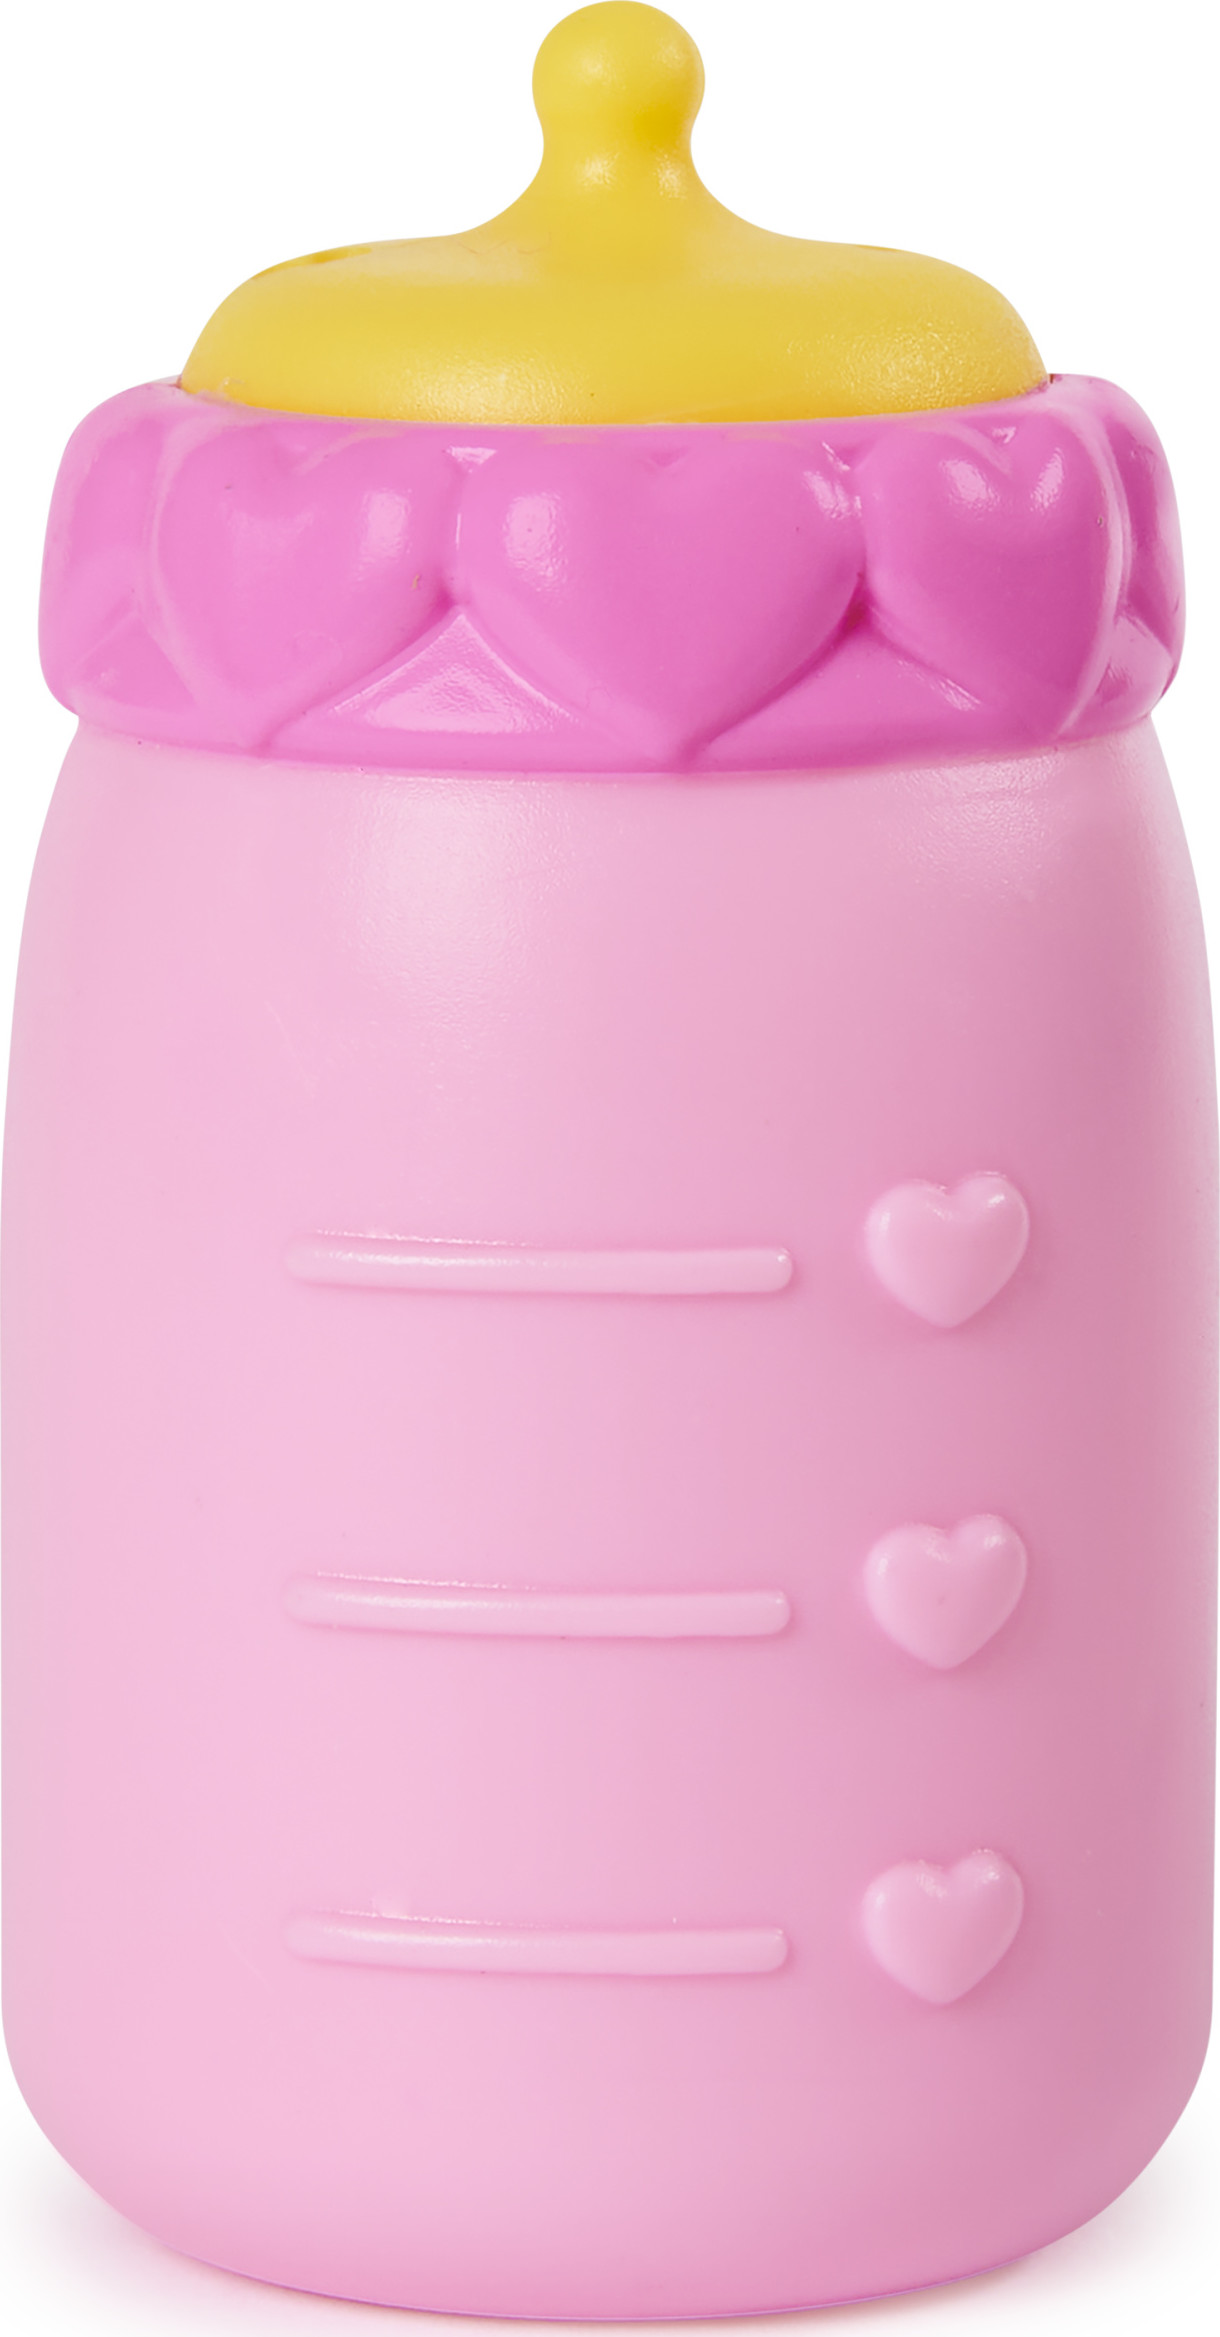 Luvzies by Luvabella, Kitten Onesie 11-inch Cuddly Baby Doll with Bottle Accessory, for Kids Aged 4 and up - image 5 of 5